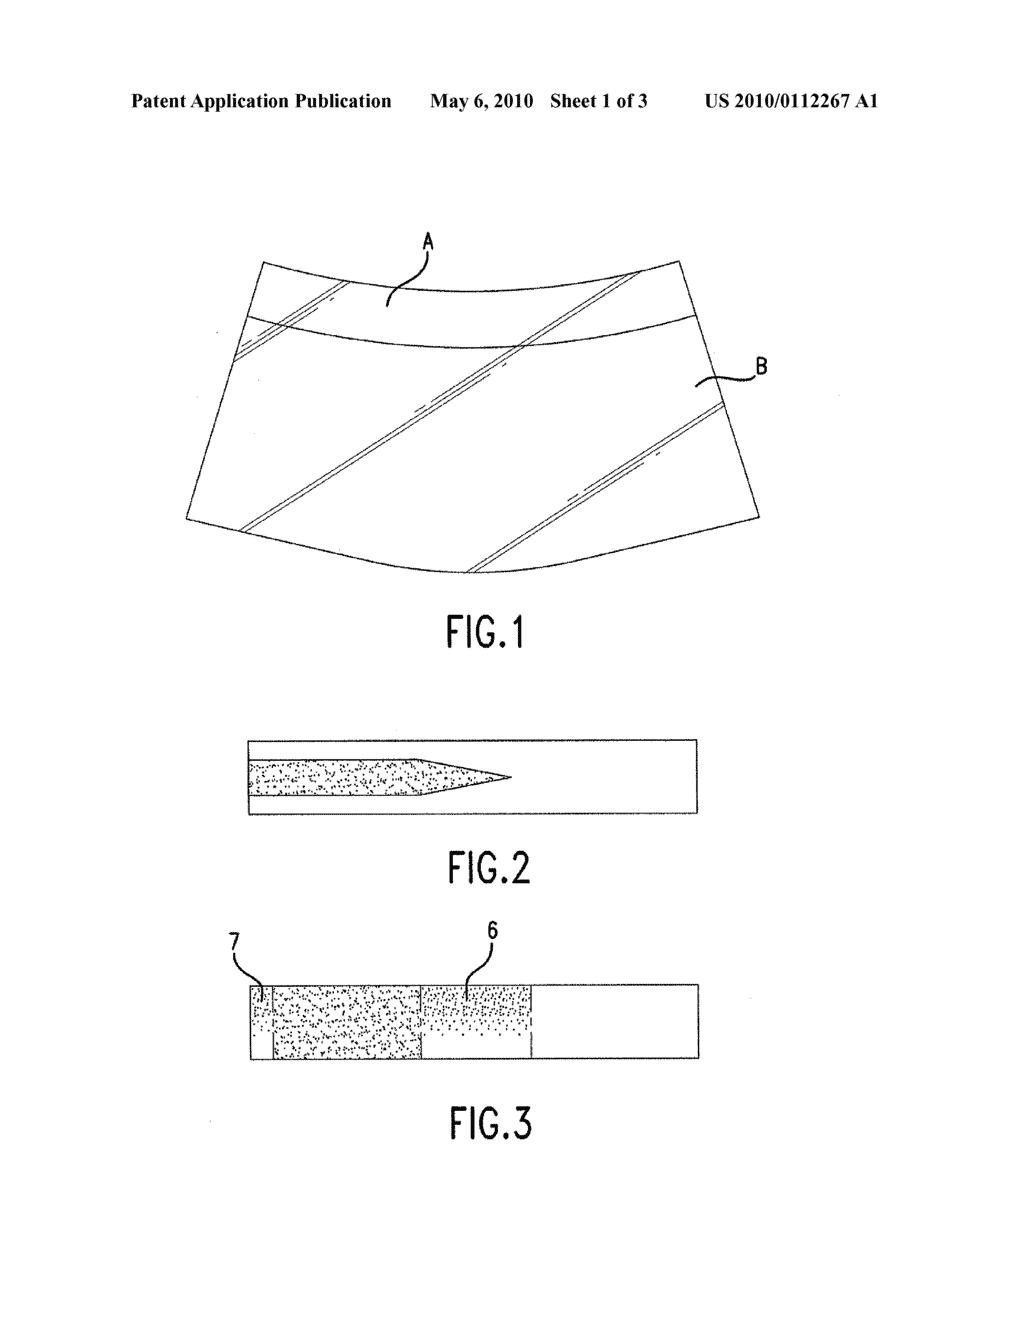 Method for Injection Molding of Thermoplastic Polymer Material with Continuous Property Transitions - diagram, schematic, and image 02